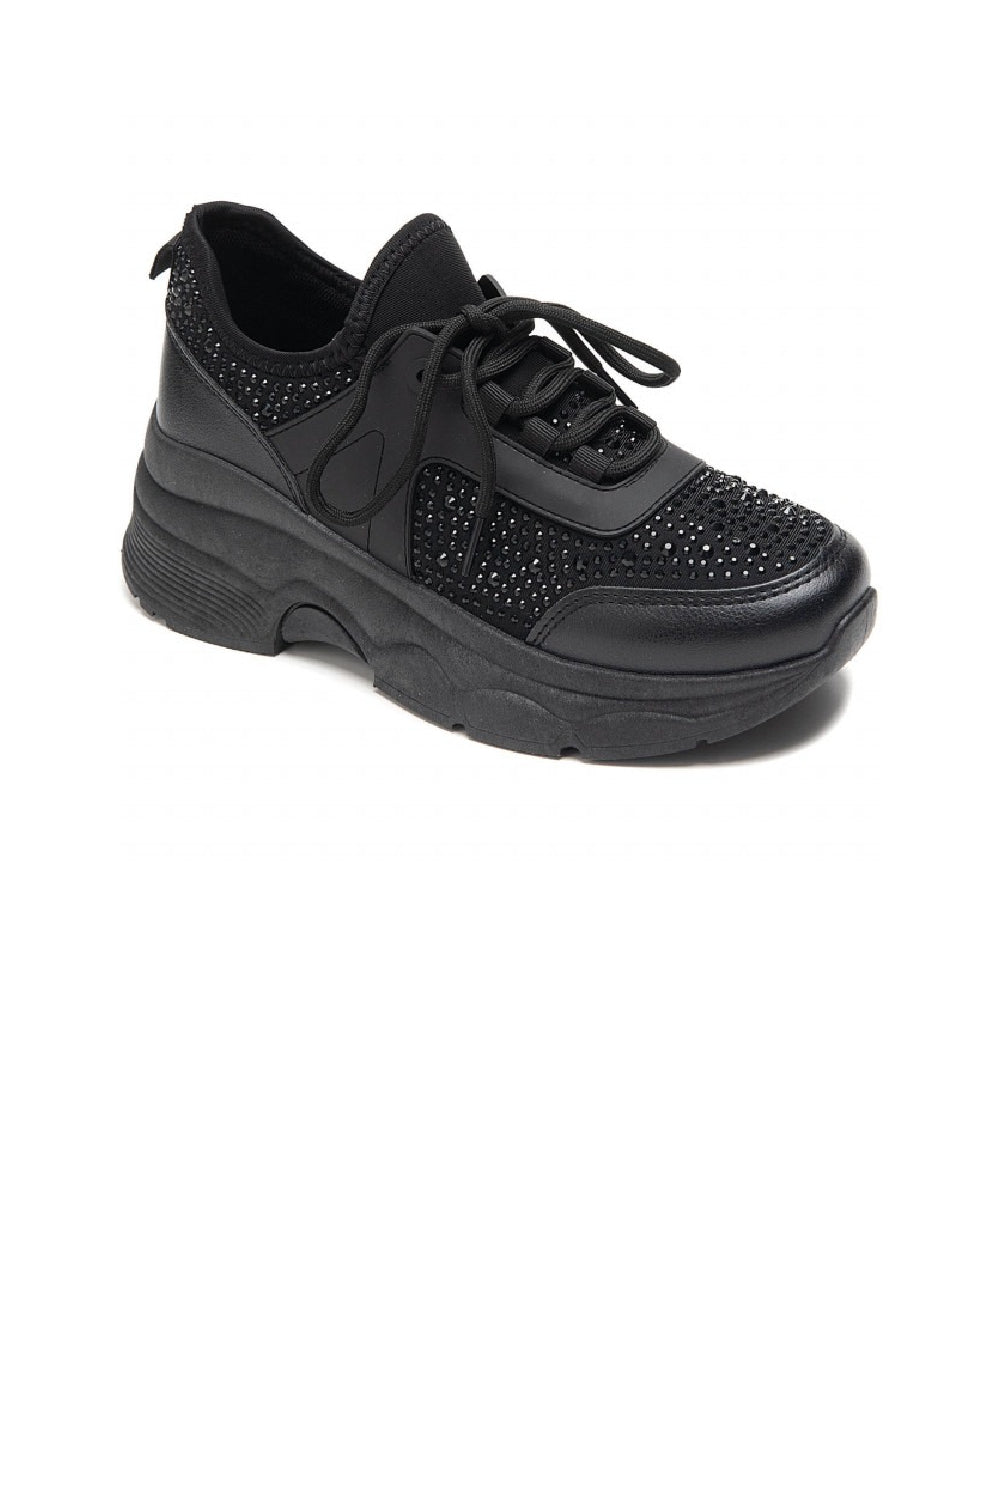 BLACK DIAMANTE DETAIL LACE UP SPAKLY CHUNKY FLAT TRAINERS